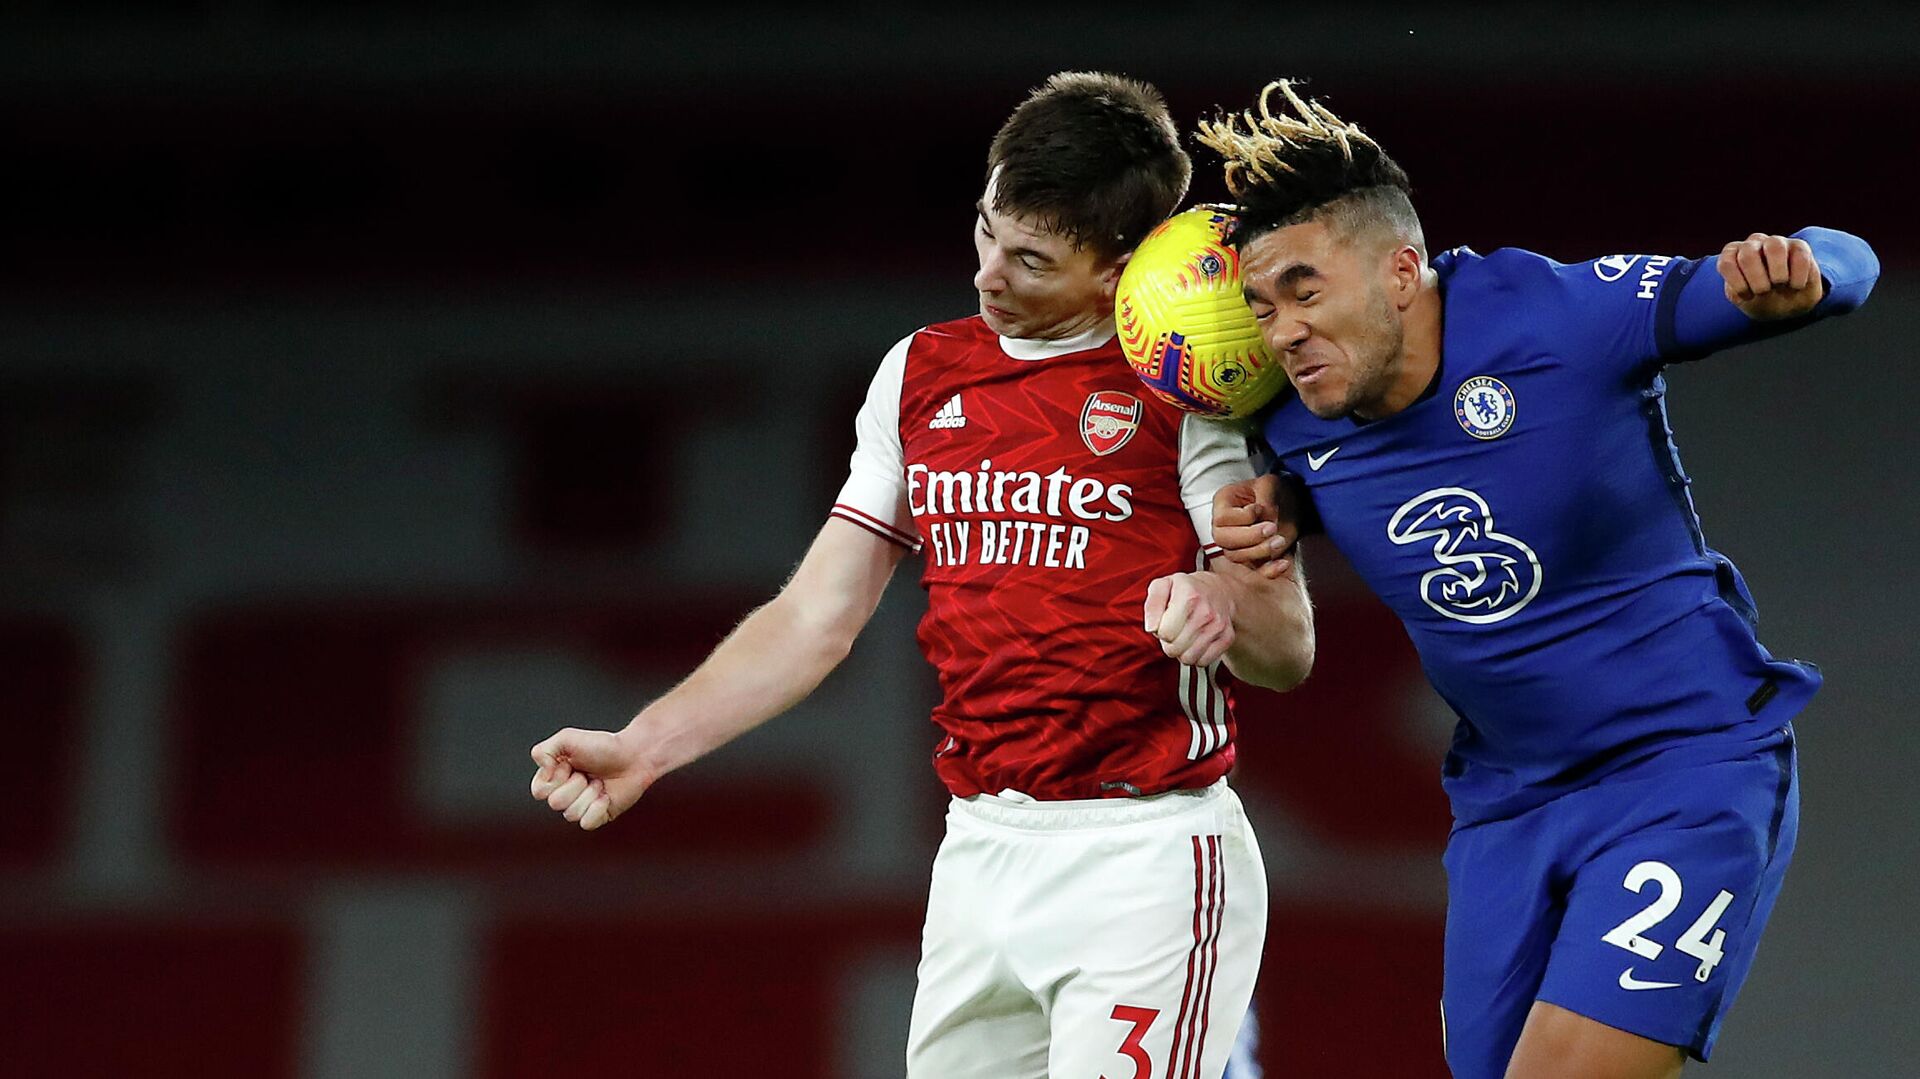 Arsenal's Scottish defender Kieran Tierney (L) and Chelsea's English defender Reece James compete during the English Premier League football match between Arsenal and Chelsea at the Emirates Stadium in London on December 26, 2020. (Photo by ANDREW BOYERS / POOL / AFP) / RESTRICTED TO EDITORIAL USE. No use with unauthorized audio, video, data, fixture lists, club/league logos or 'live' services. Online in-match use limited to 120 images. An additional 40 images may be used in extra time. No video emulation. Social media in-match use limited to 120 images. An additional 40 images may be used in extra time. No use in betting publications, games or single club/league/player publications. /  - РИА Новости, 1920, 26.12.2020